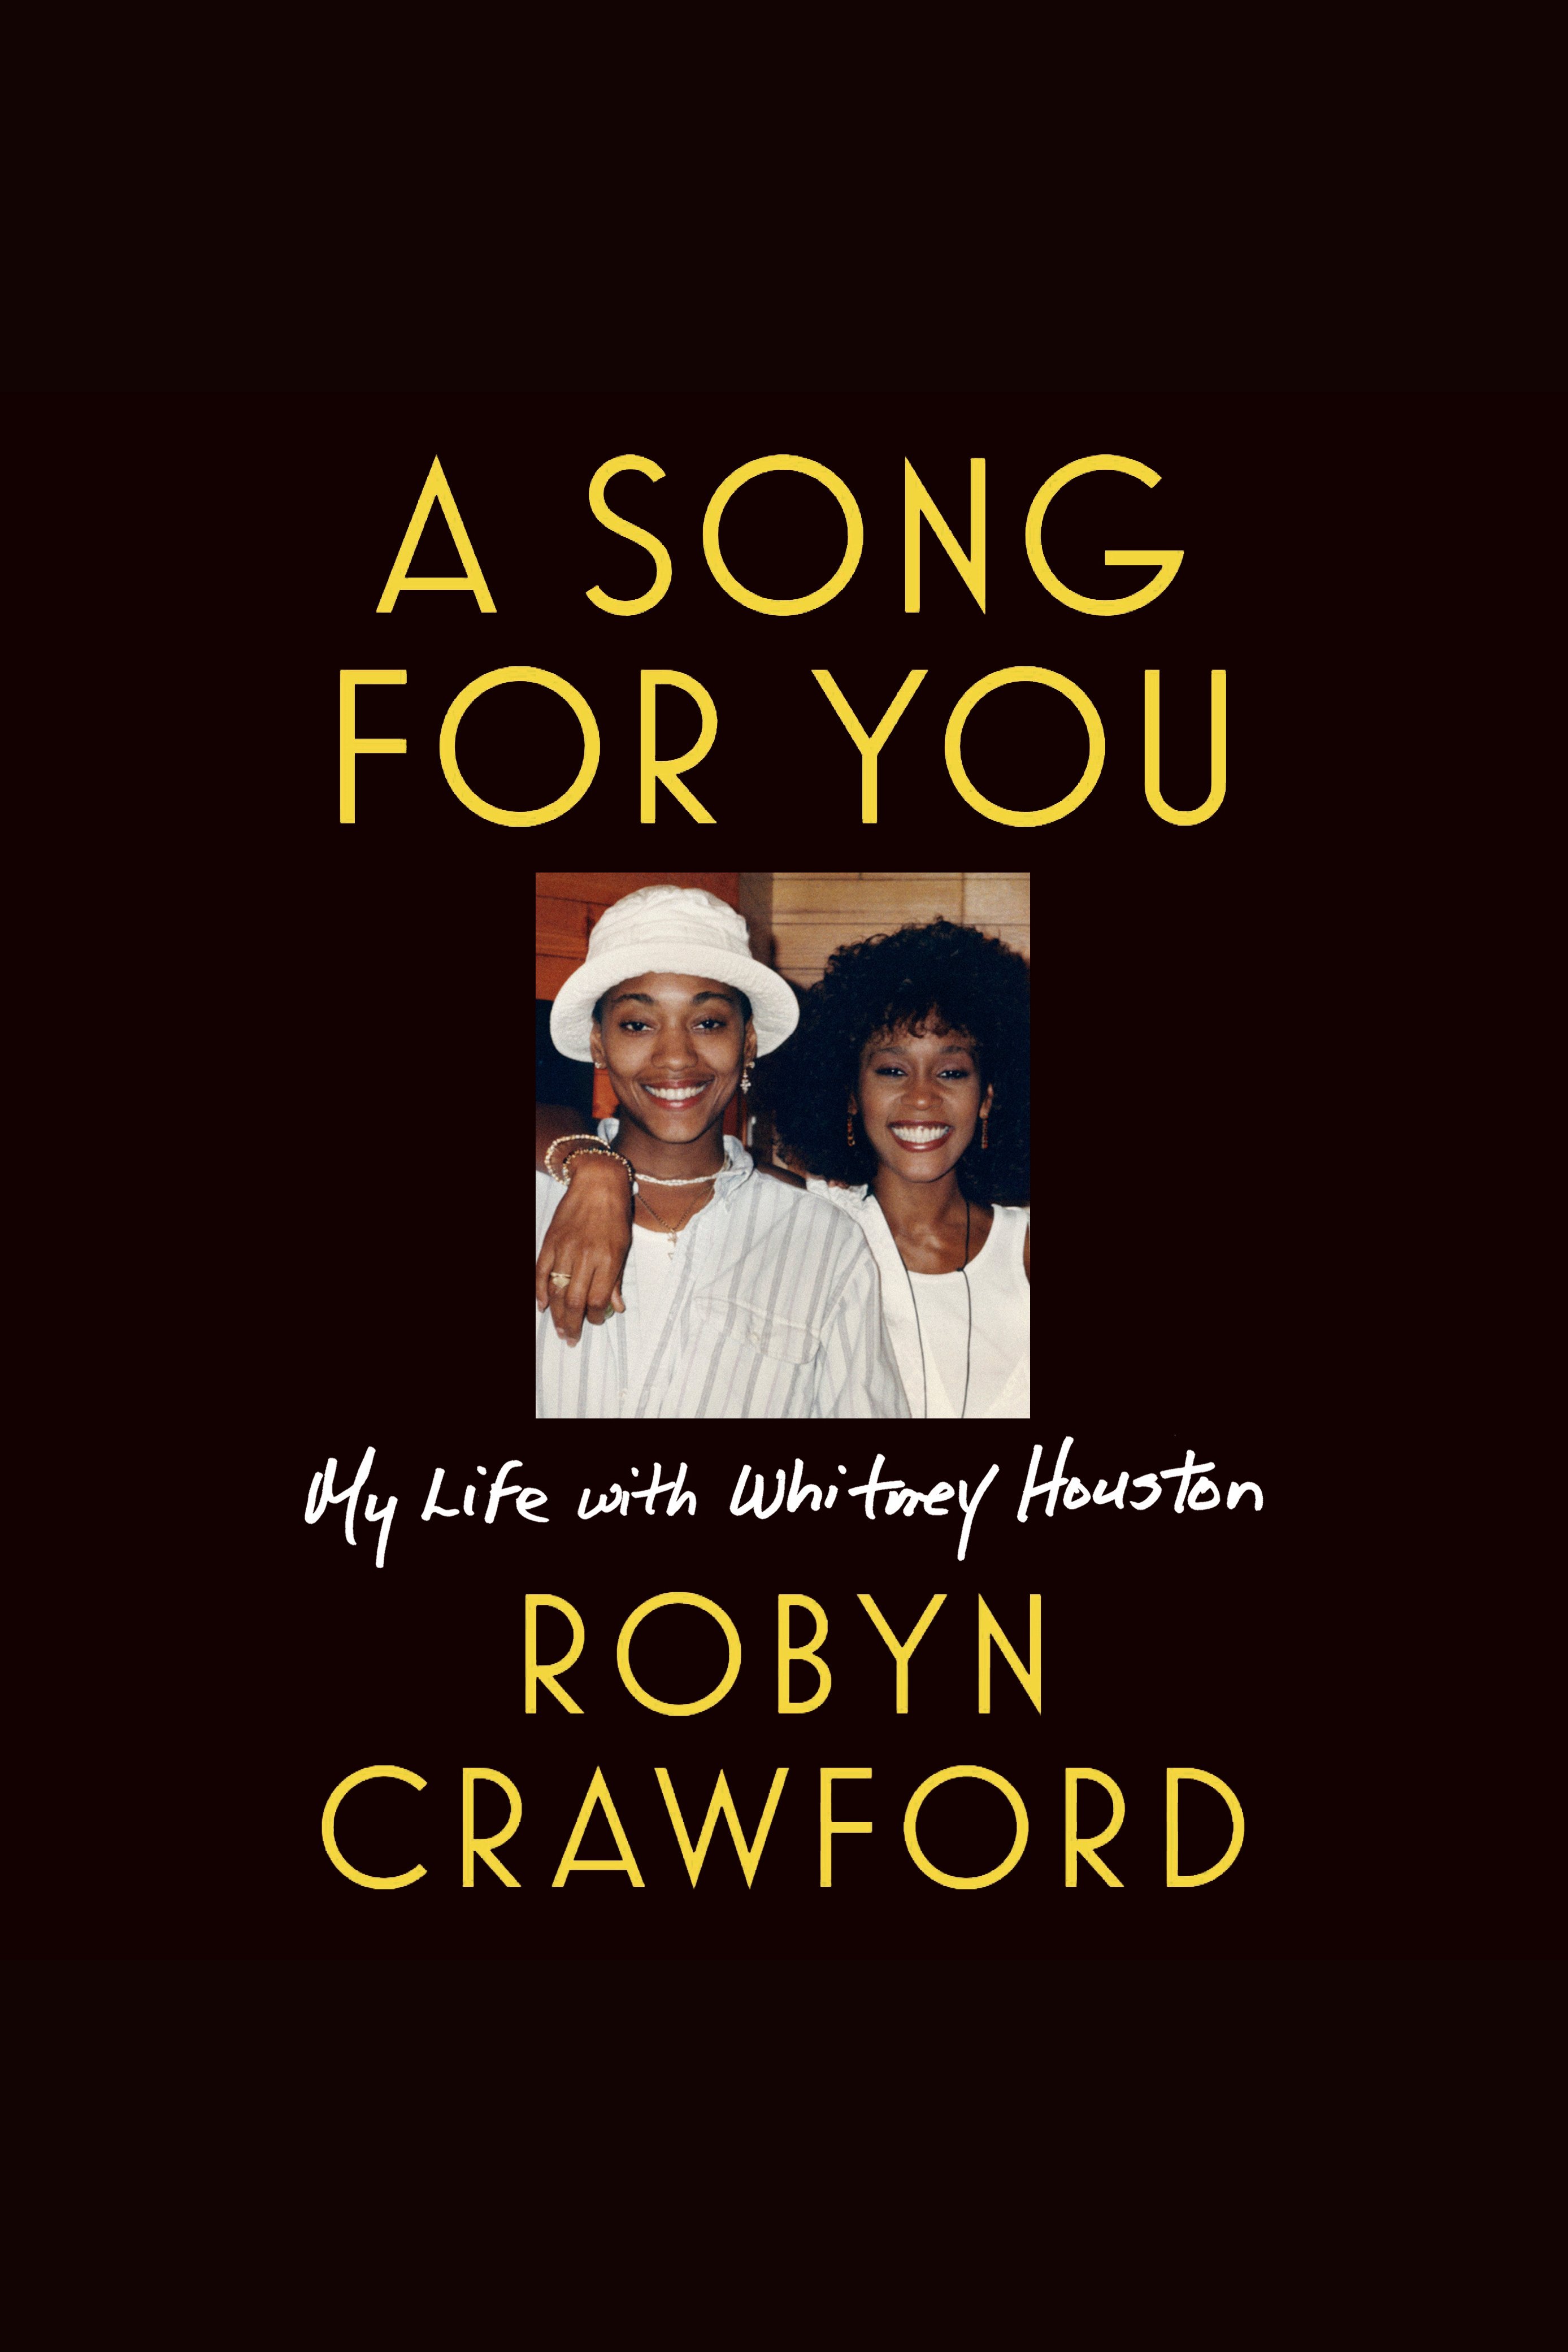 Umschlagbild für Song for You, A [electronic resource] : My Life with Whitney Houston